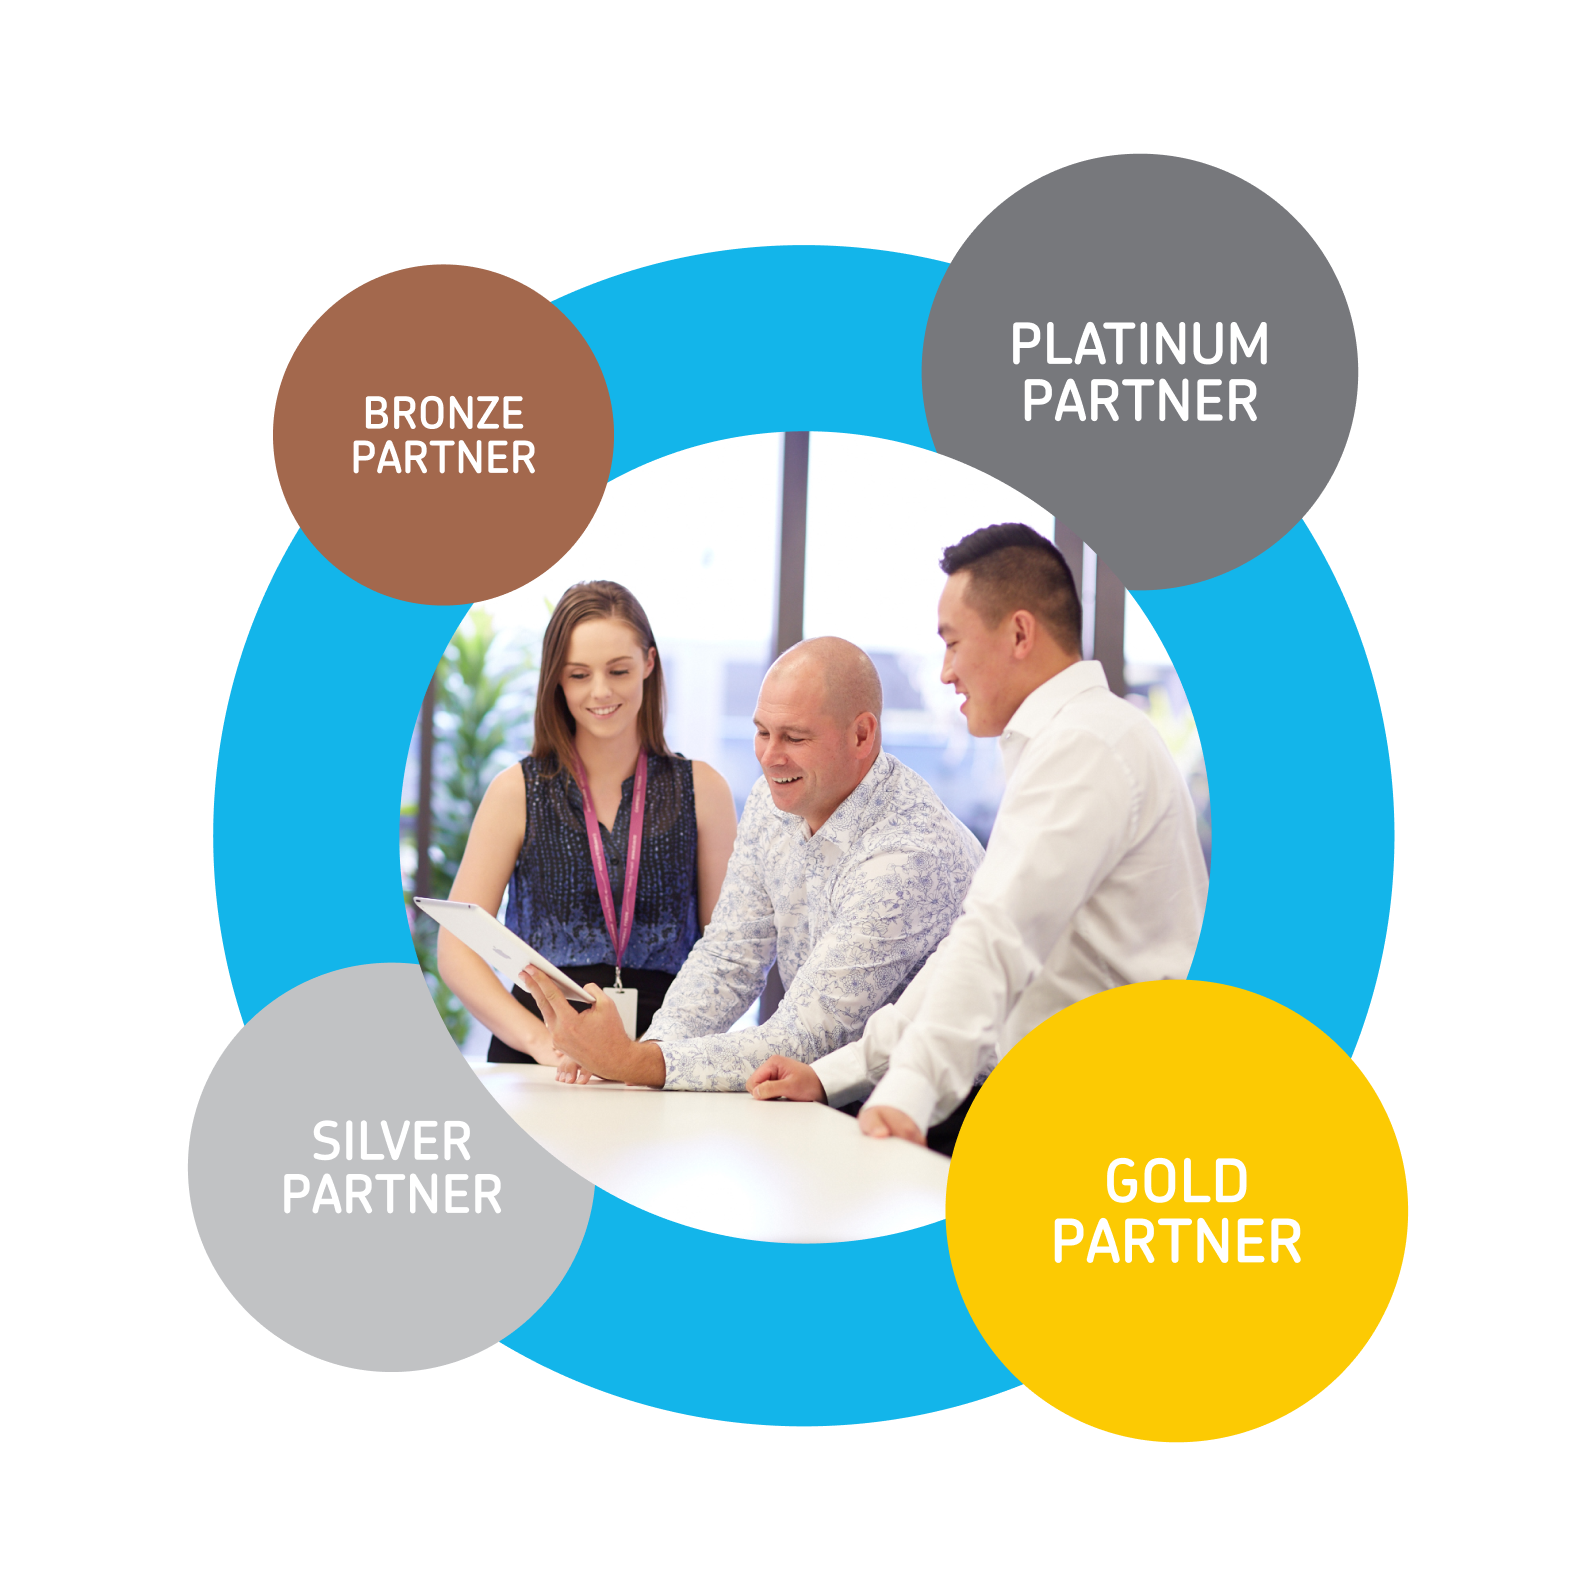  Xero partners plan how to move up the partner status levels from bronze to silver then gold and platinum.